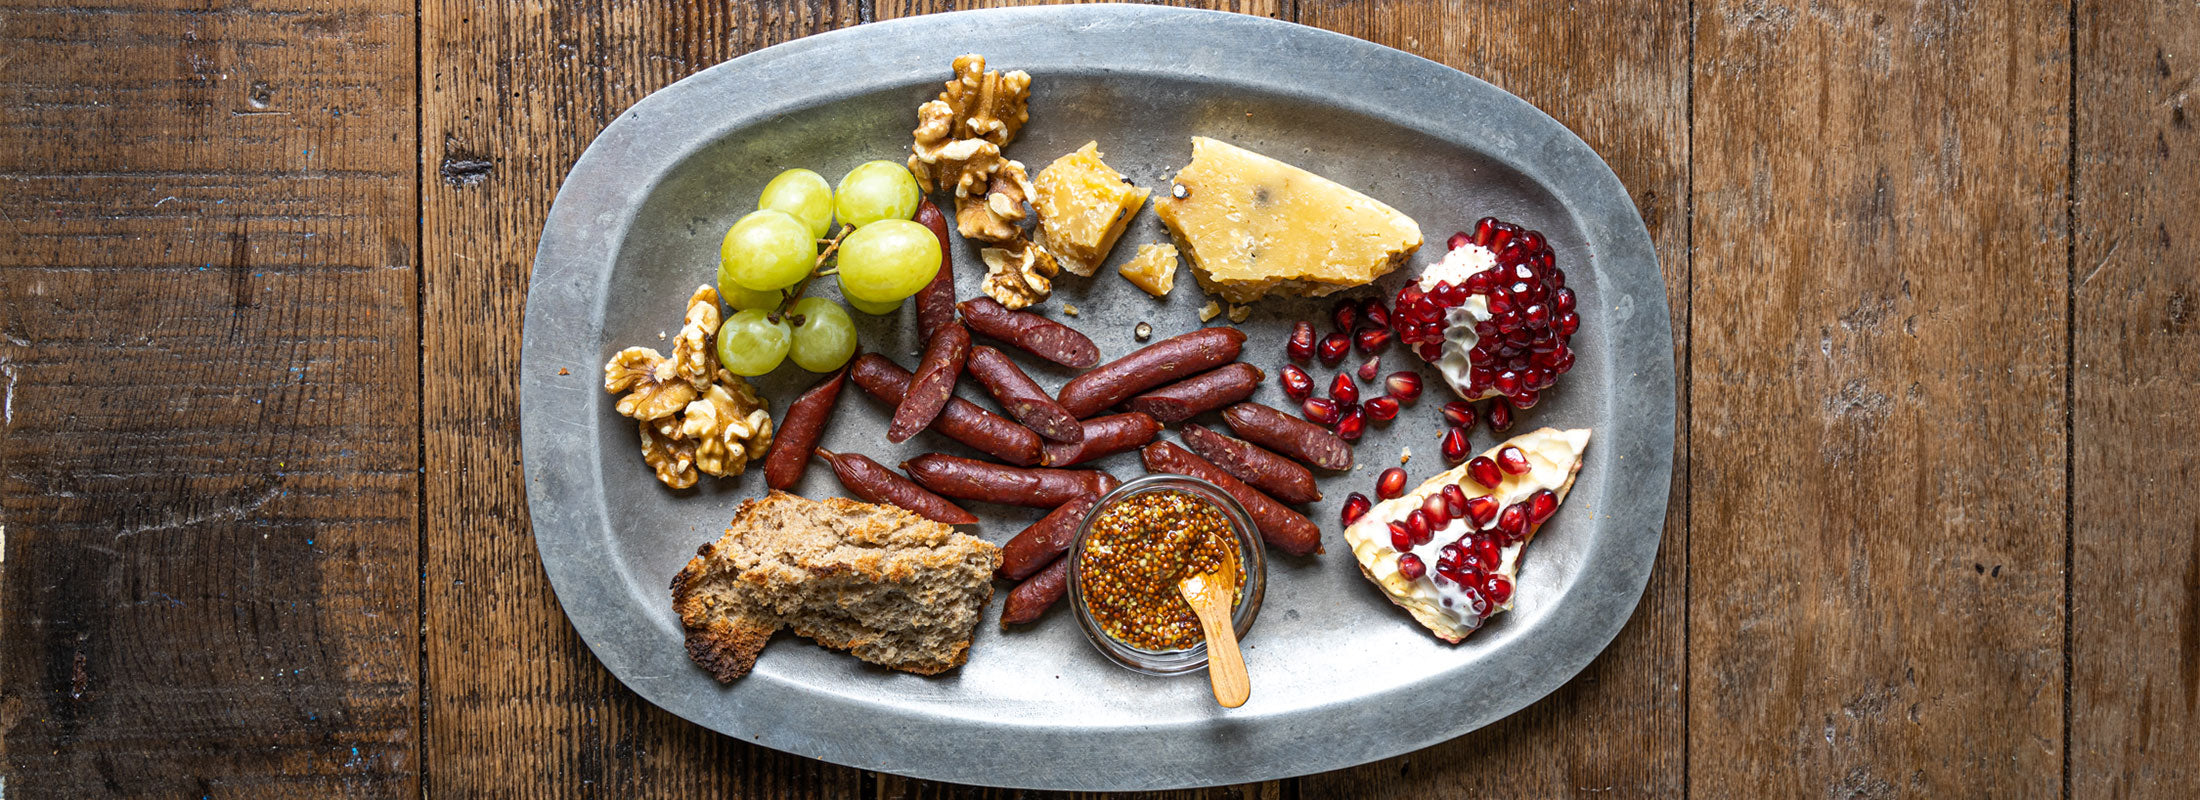 A metal tray on a wooden table serves Patagonia Provisions Buffalo Links, cheeses, fruits, and bread